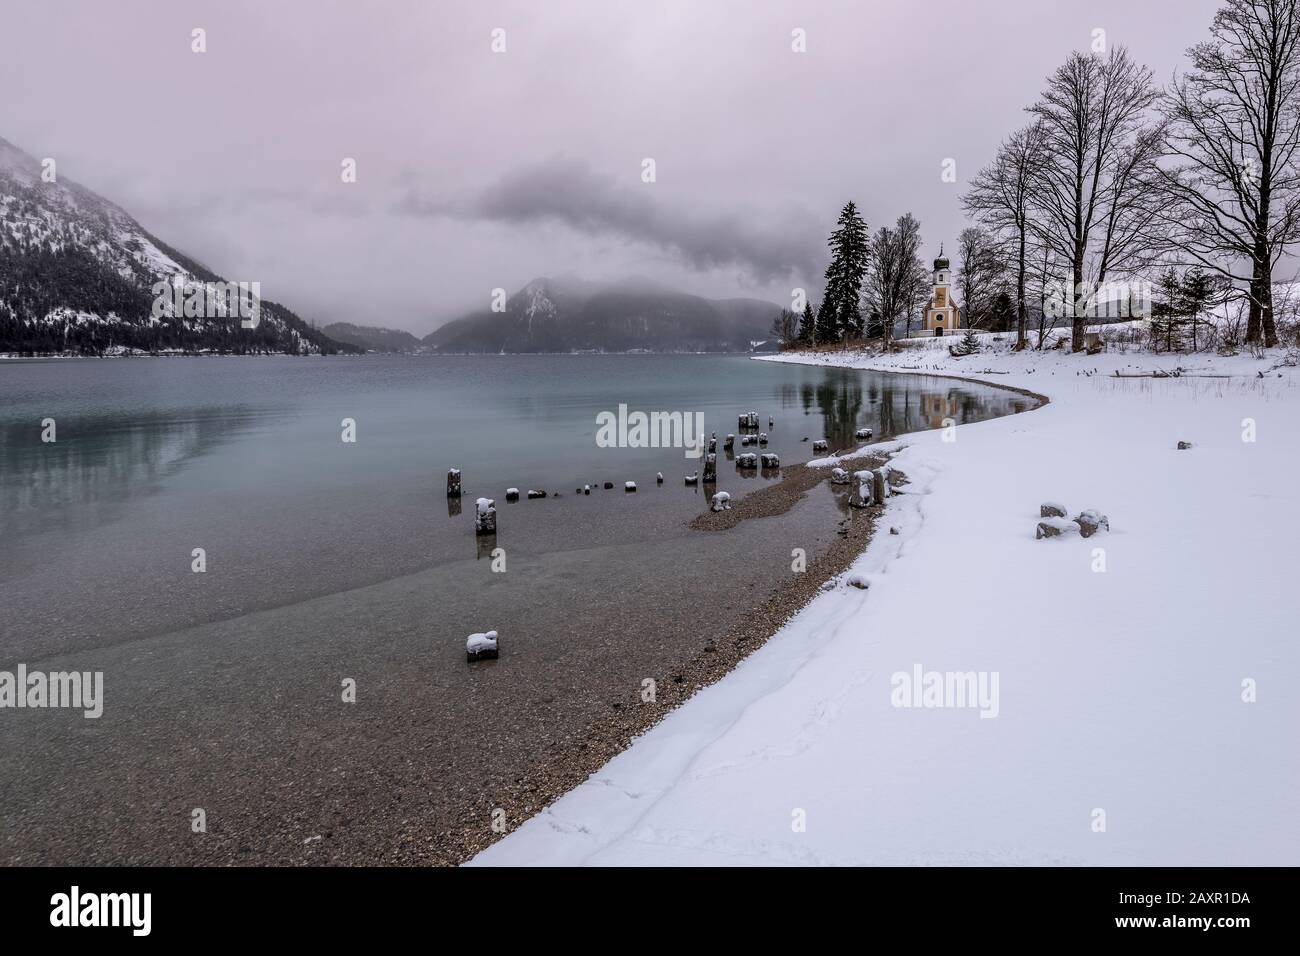 On the Zwergern peninsula on the winter shore of the lake Walchensee in the Bavarian Prealps Stock Photo